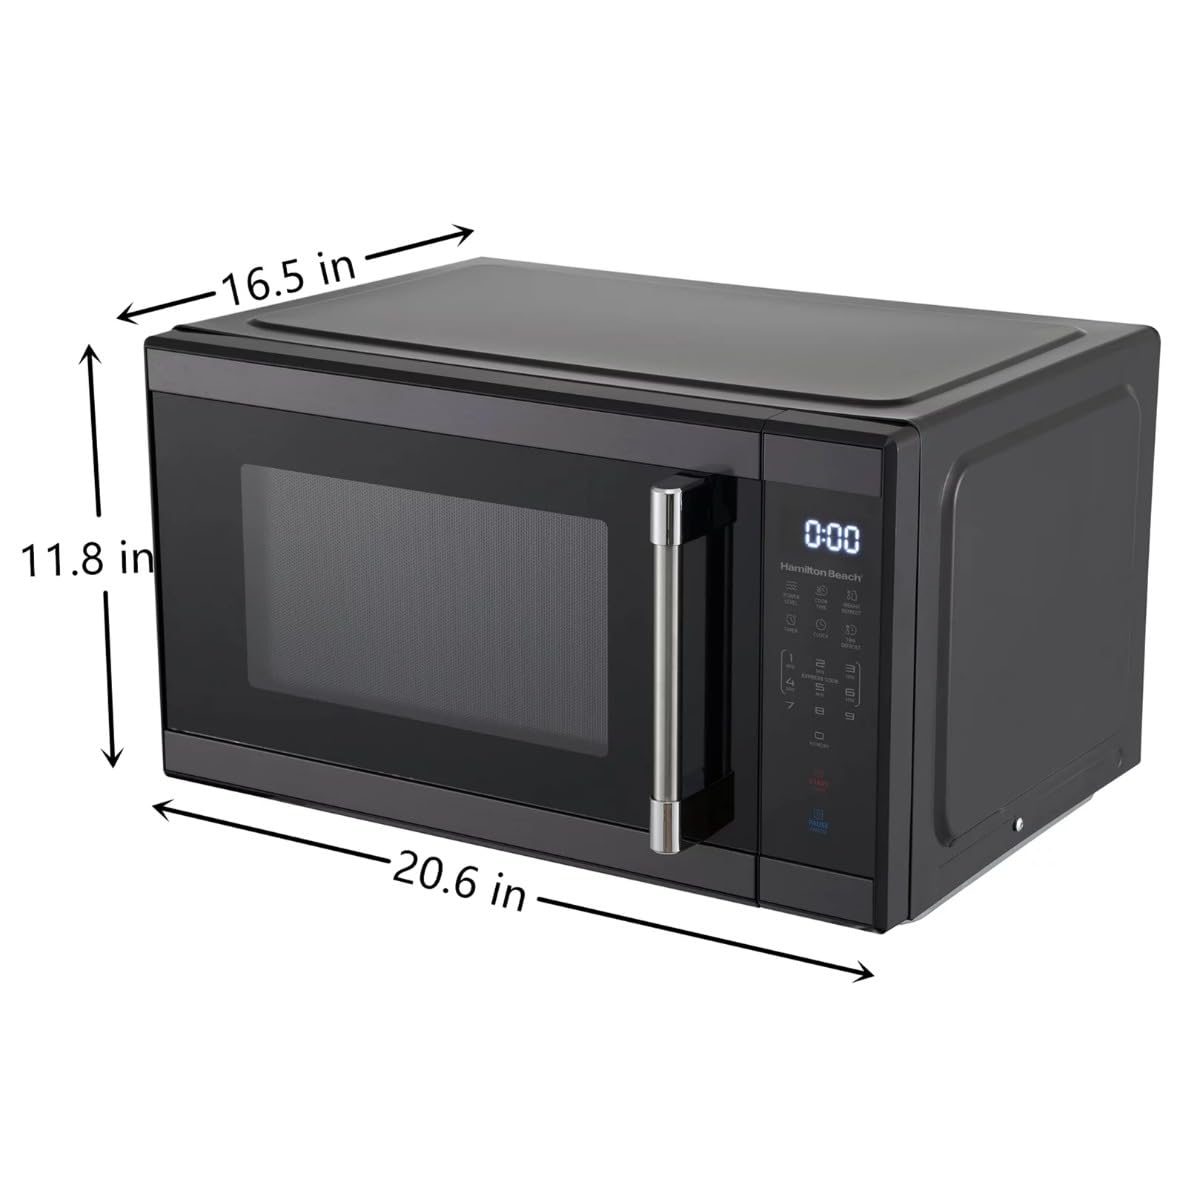 1.1 cu. ft. Countertop Microwave Oven, 1000 Watts, Black Stainless Steel